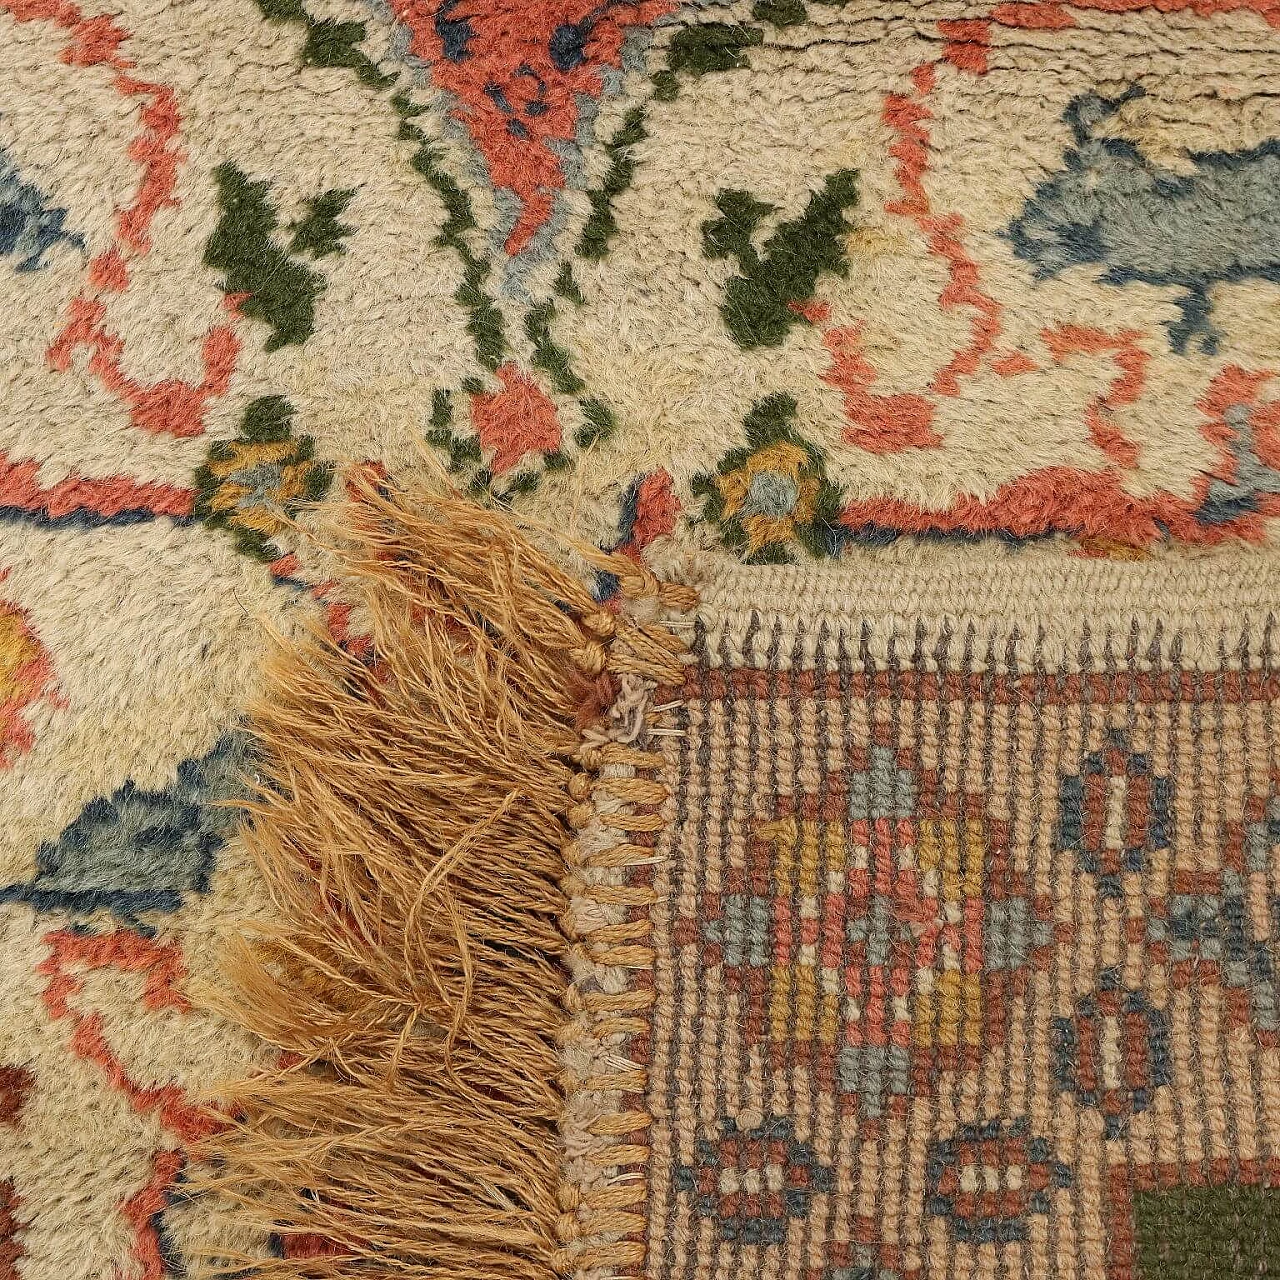 3 Moroccan cotton and wool Marrakech rugs 10